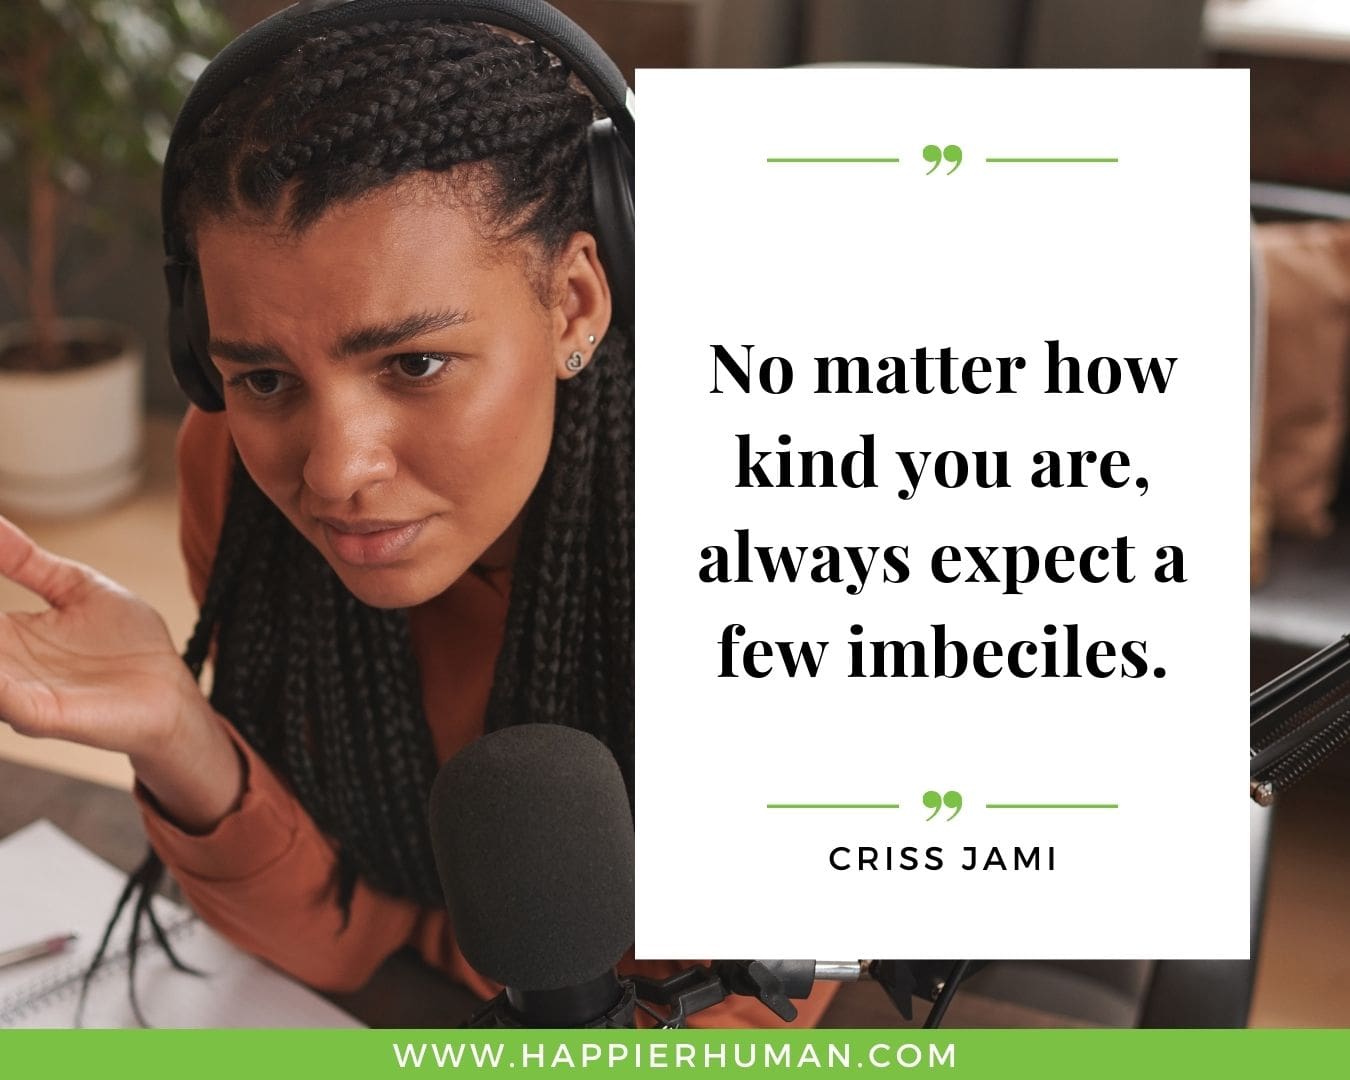 Haters Quotes - “No matter how kind you are, always expect a few imbeciles.“- Criss Jami